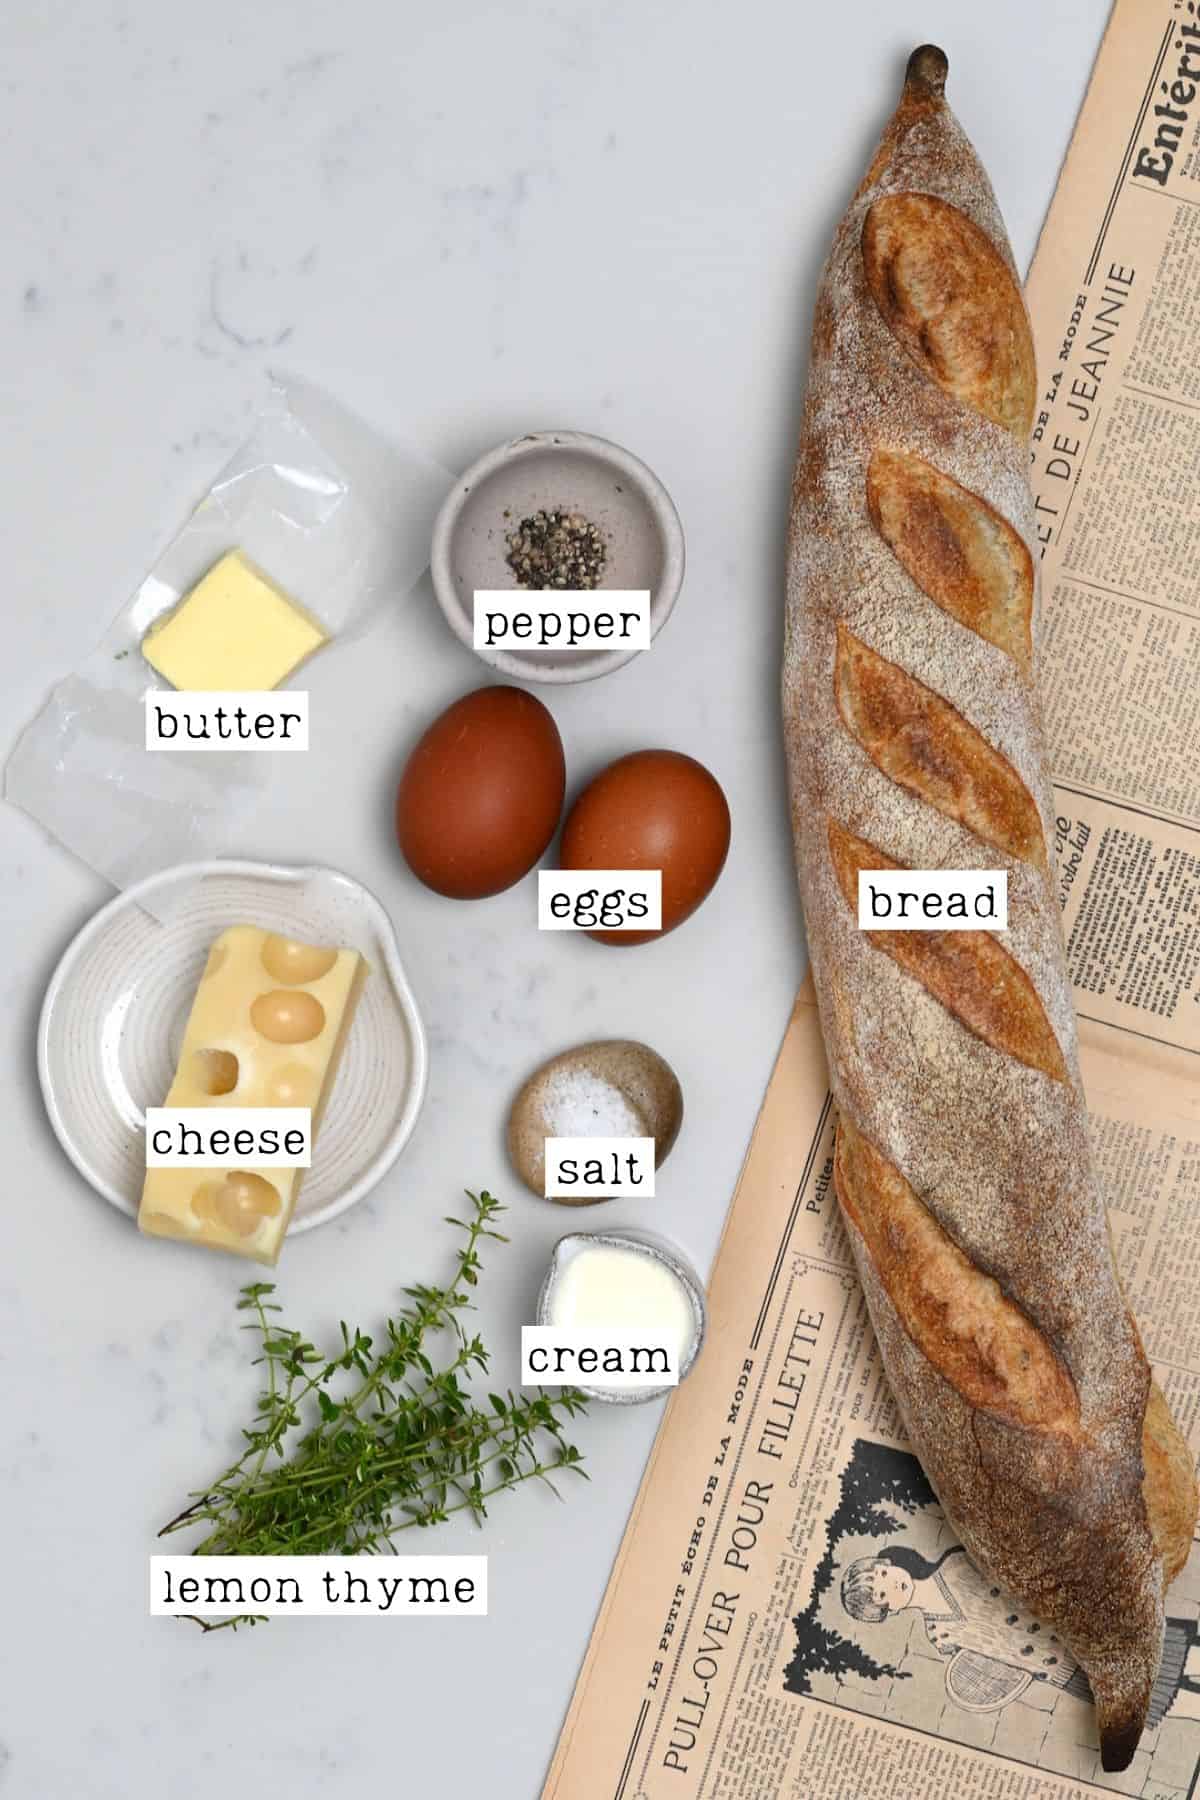 Ingredients for baked eggs